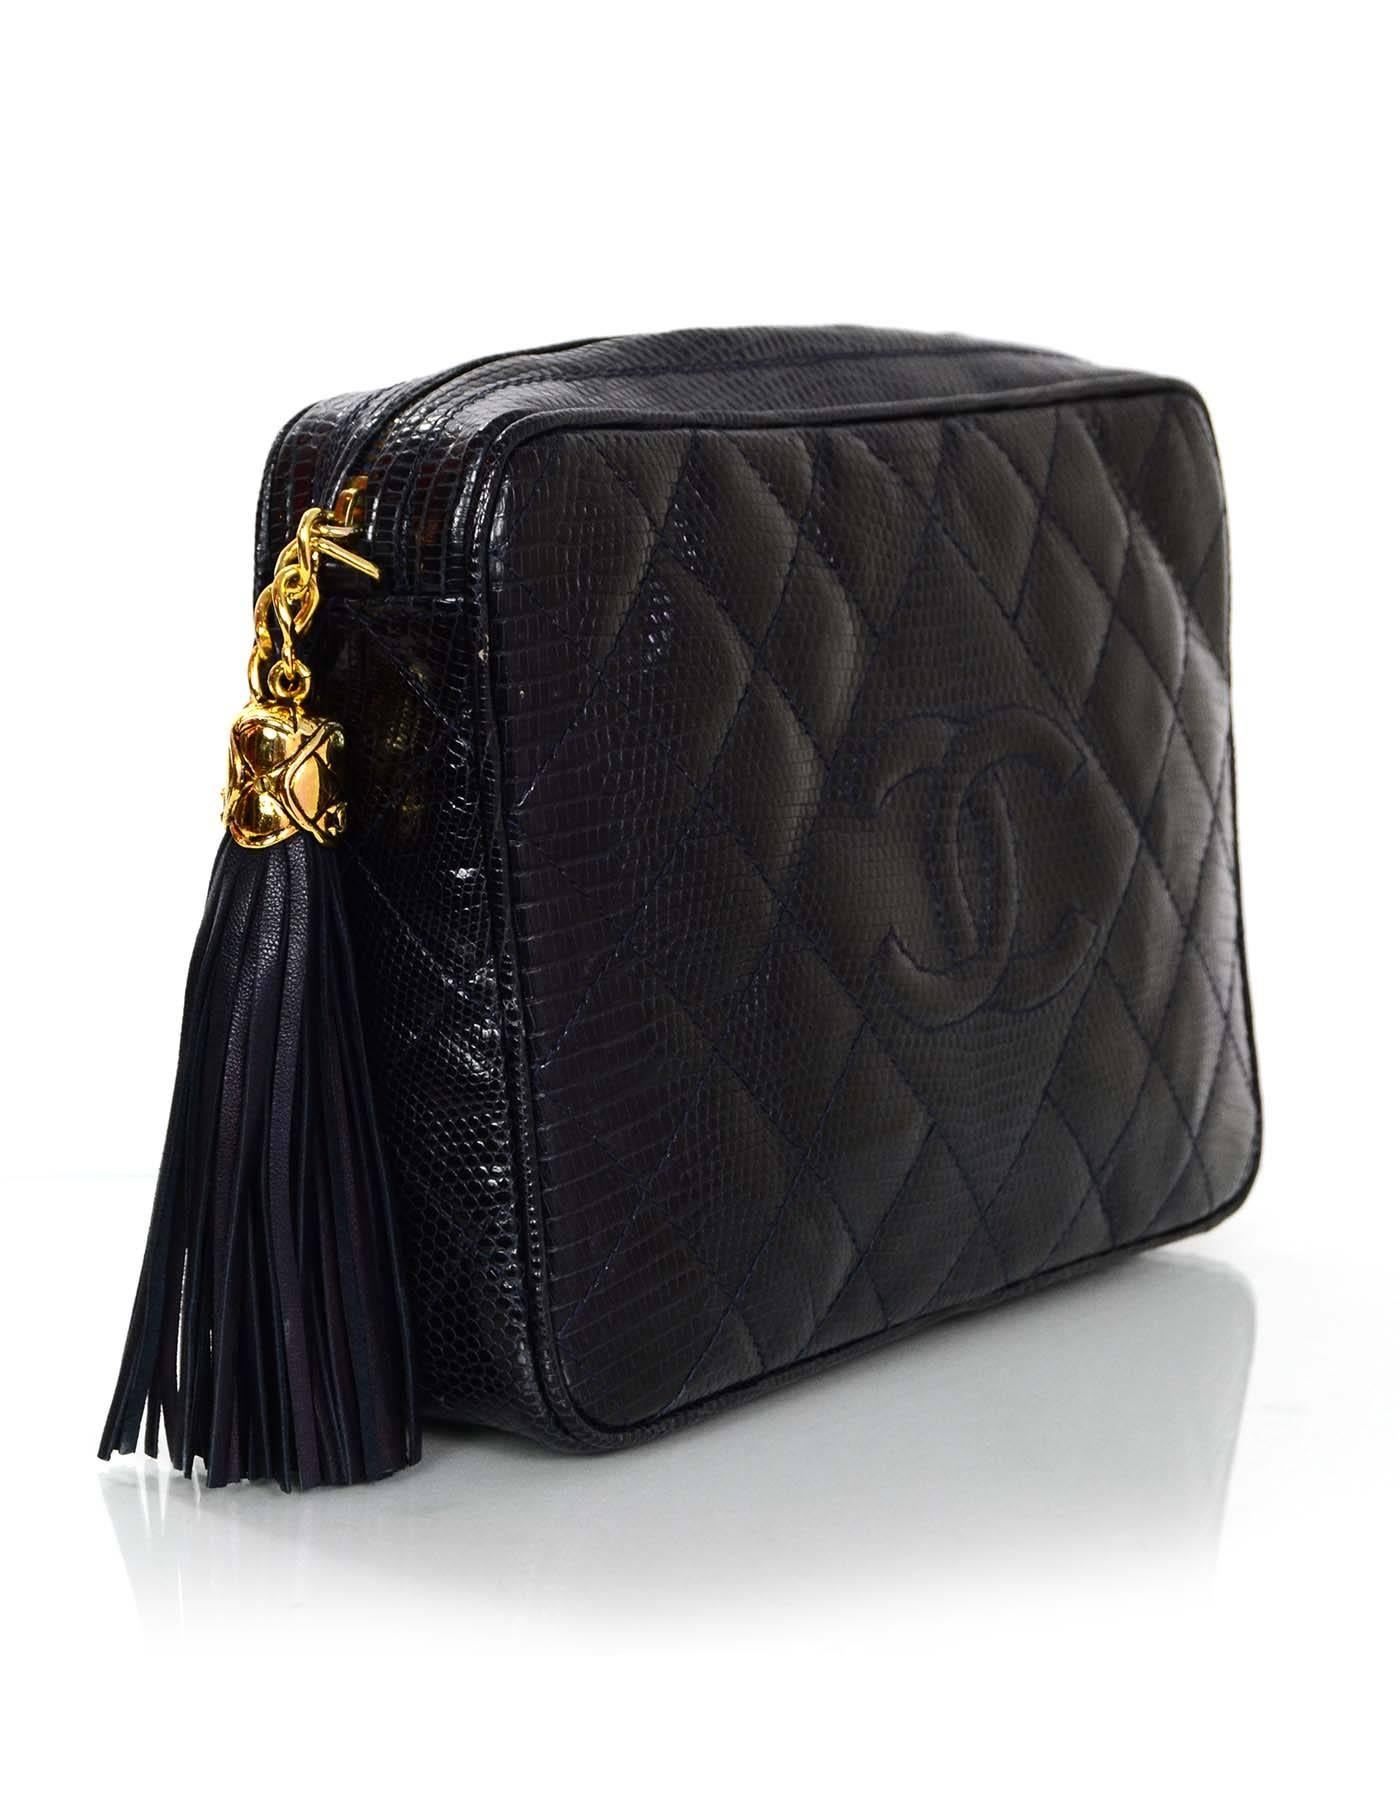 Chanel Navy Lizard Skin Camera Bag 
Features timeless CC at front and quilted goldtone tassel zipper pull

Made In: Italy
Year of Production: 1989-1991
Color: Navy
Hardware: Goldtone
Materials: Lizard skin
Lining: Navy